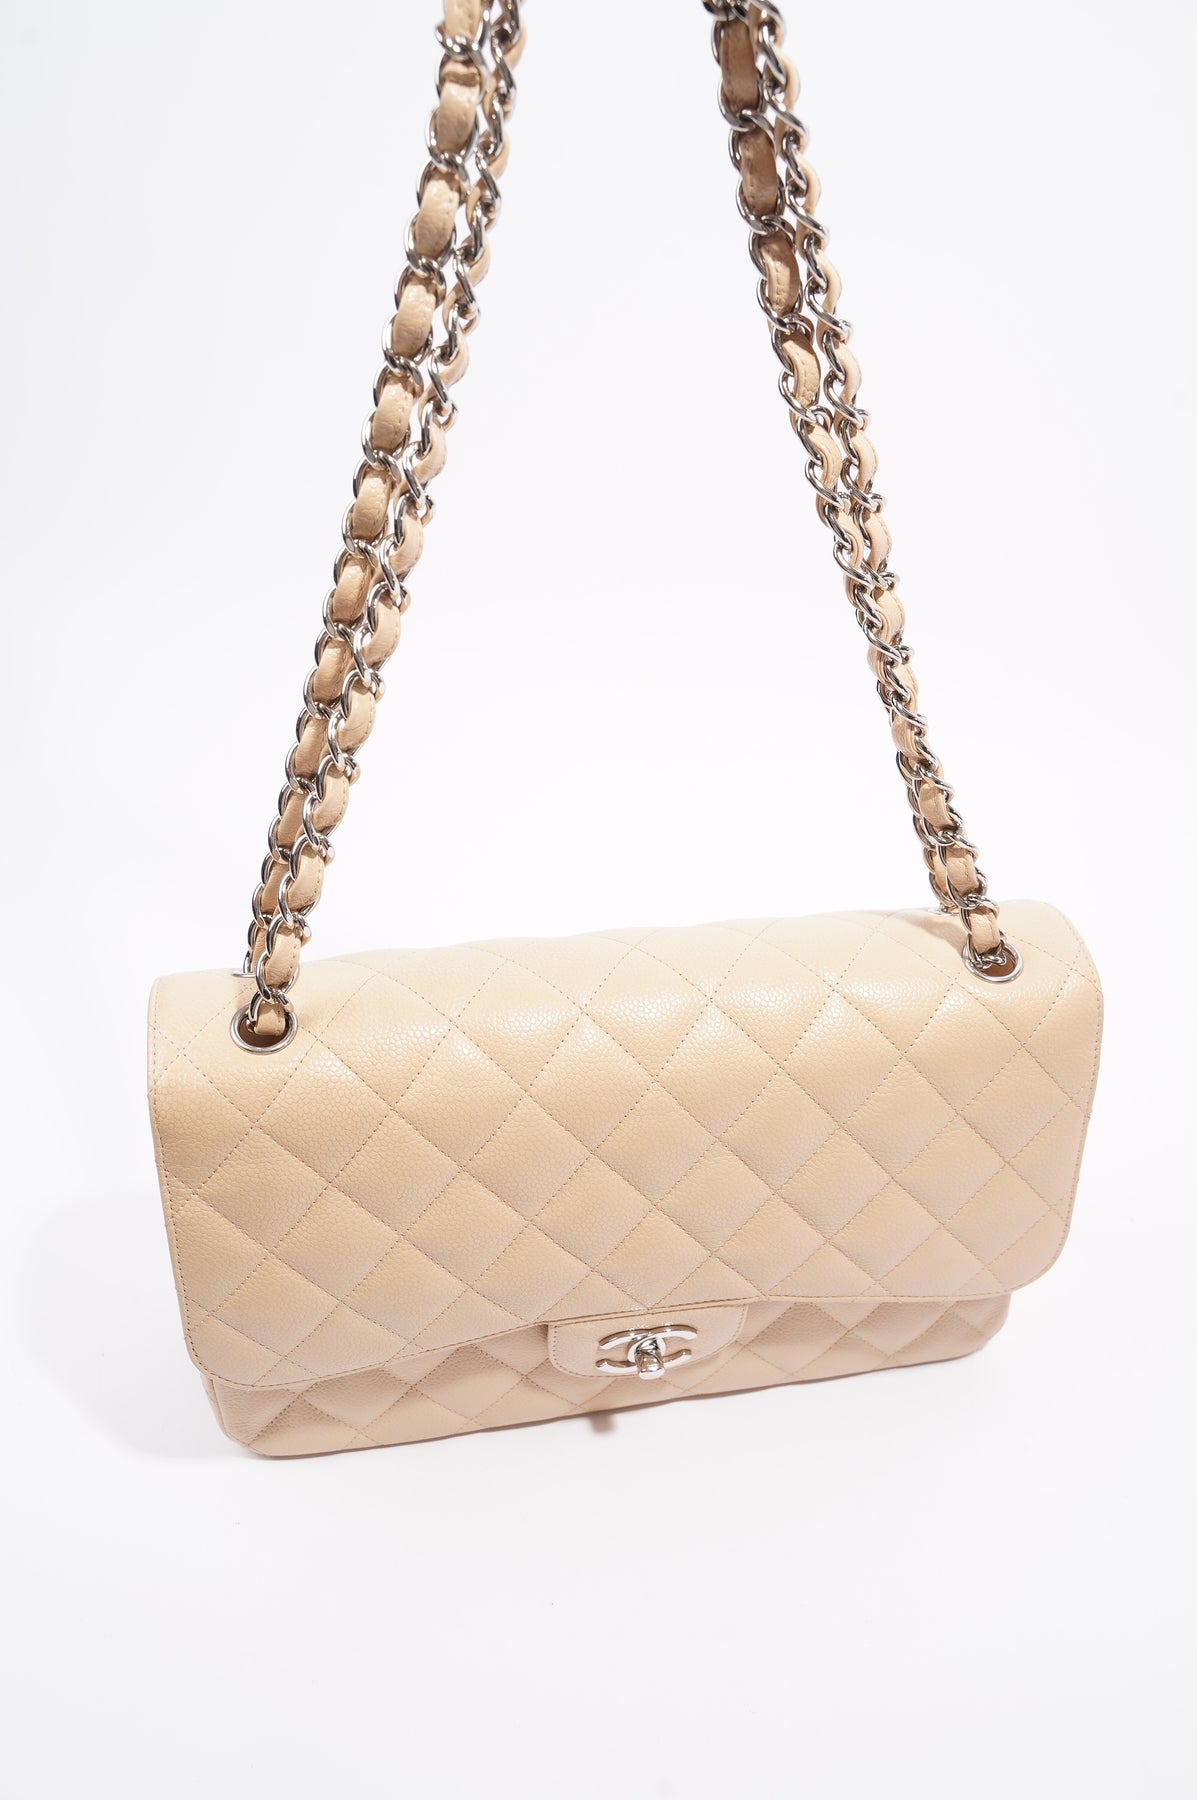 chanel carry on bag